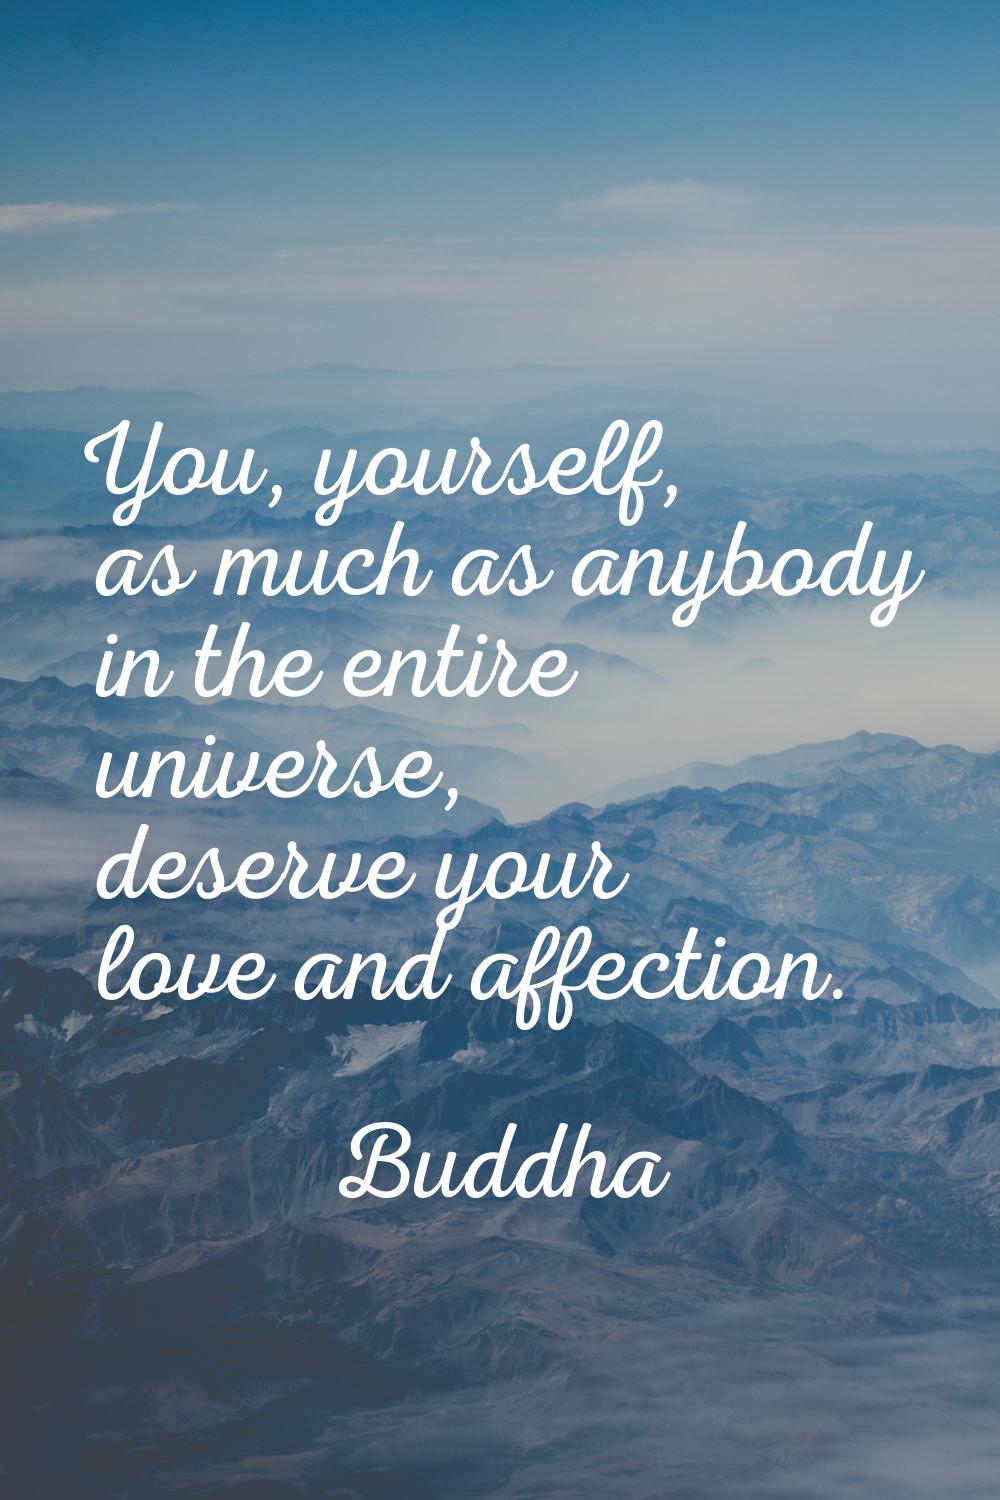 You, yourself, as much as anybody in the entire universe, deserve your love and affection.